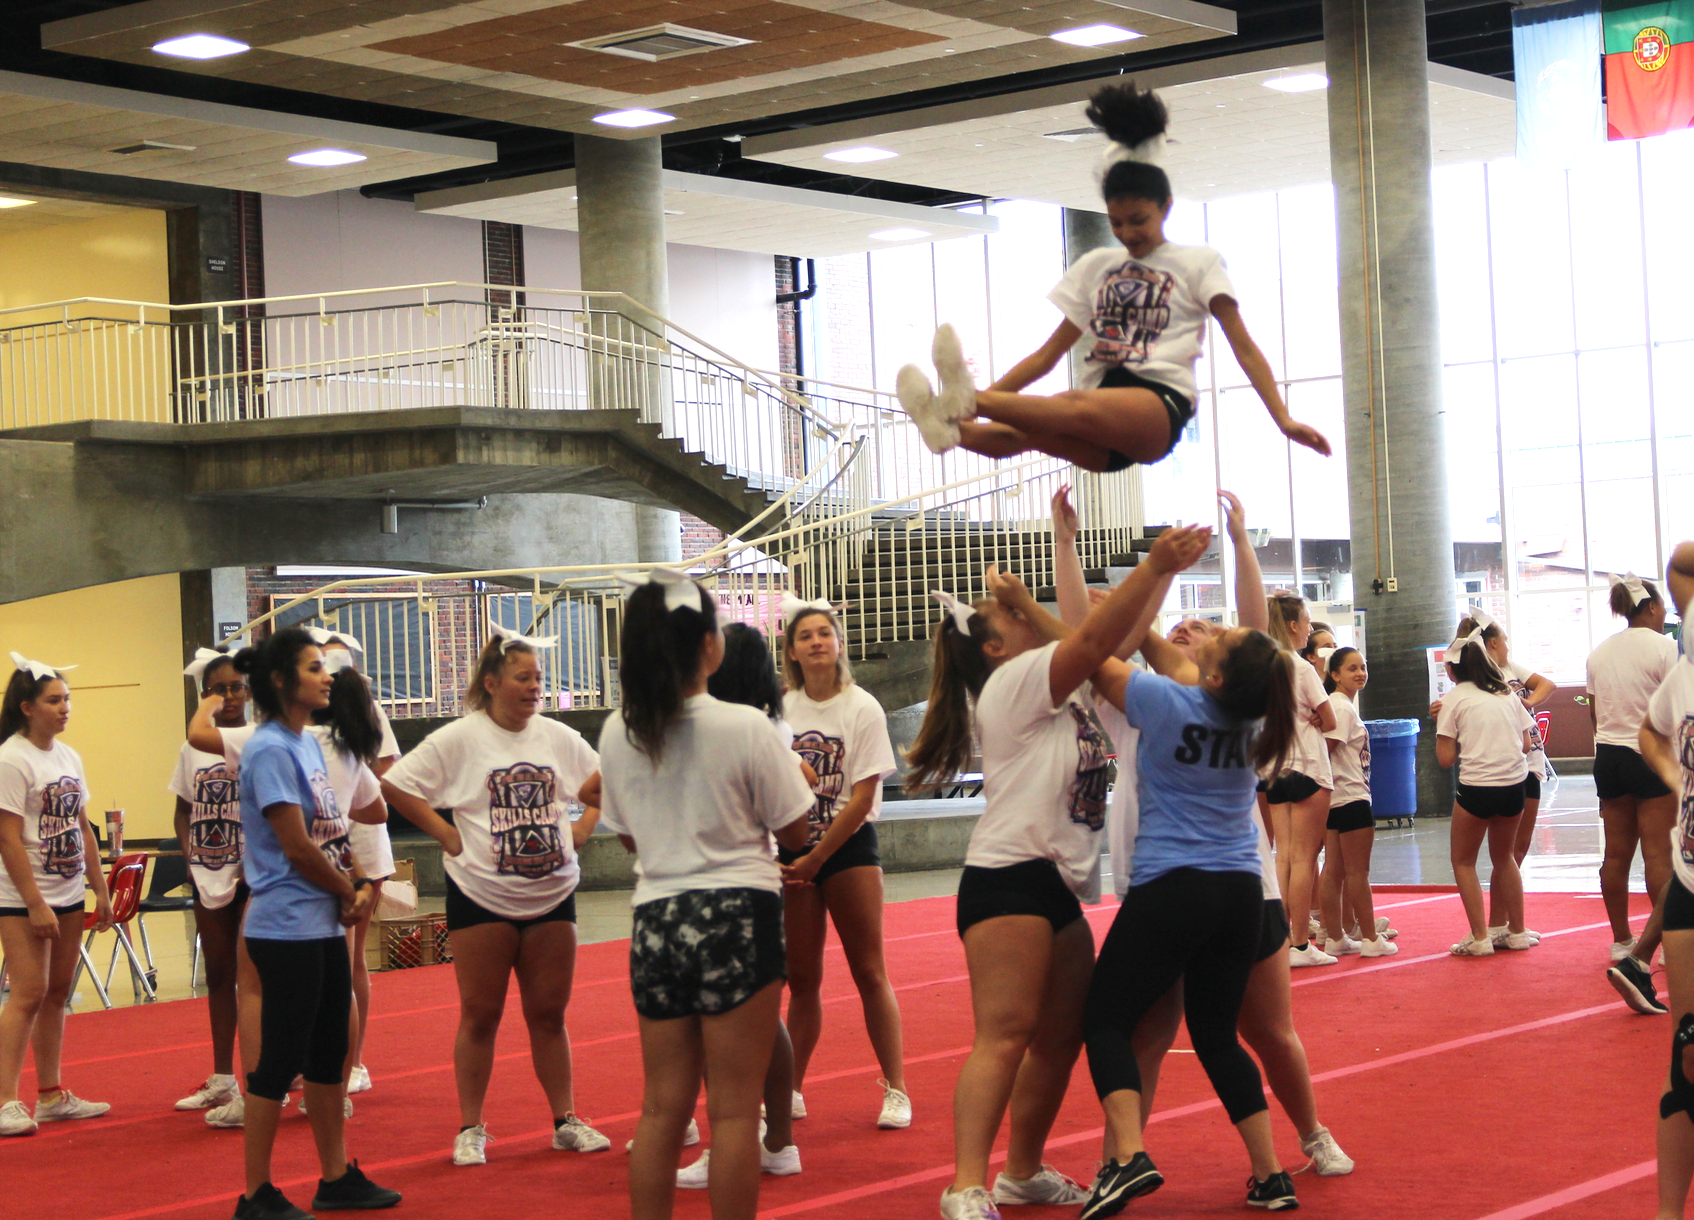 GHS Cheerleaders worked on their choreography and tumbling, Aug 22, 2018 Photo: Leslie Yager